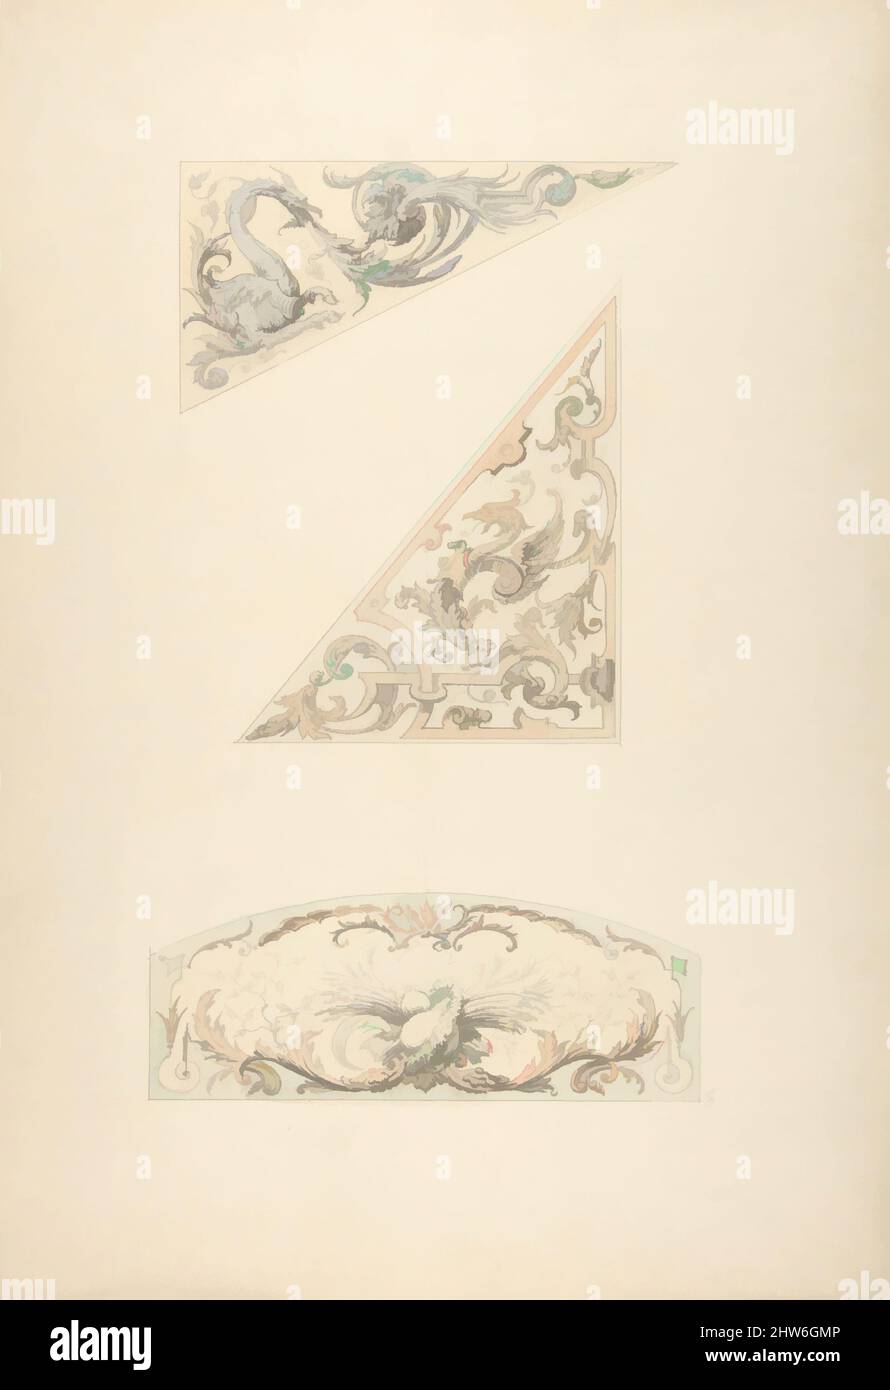 Art inspired by Three designs for painted decorative motifs featuring griffins and scrollwork, 1830–97, pen and ink, wash and watercolor over graphite on wove paper, Overall: 19 3/8 x 13 3/8 in. (49.2 x 34 cm), Drawings, Jules-Edmond-Charles Lachaise (French, died 1897), Eugène-Pierre, Classic works modernized by Artotop with a splash of modernity. Shapes, color and value, eye-catching visual impact on art. Emotions through freedom of artworks in a contemporary way. A timeless message pursuing a wildly creative new direction. Artists turning to the digital medium and creating the Artotop NFT Stock Photo